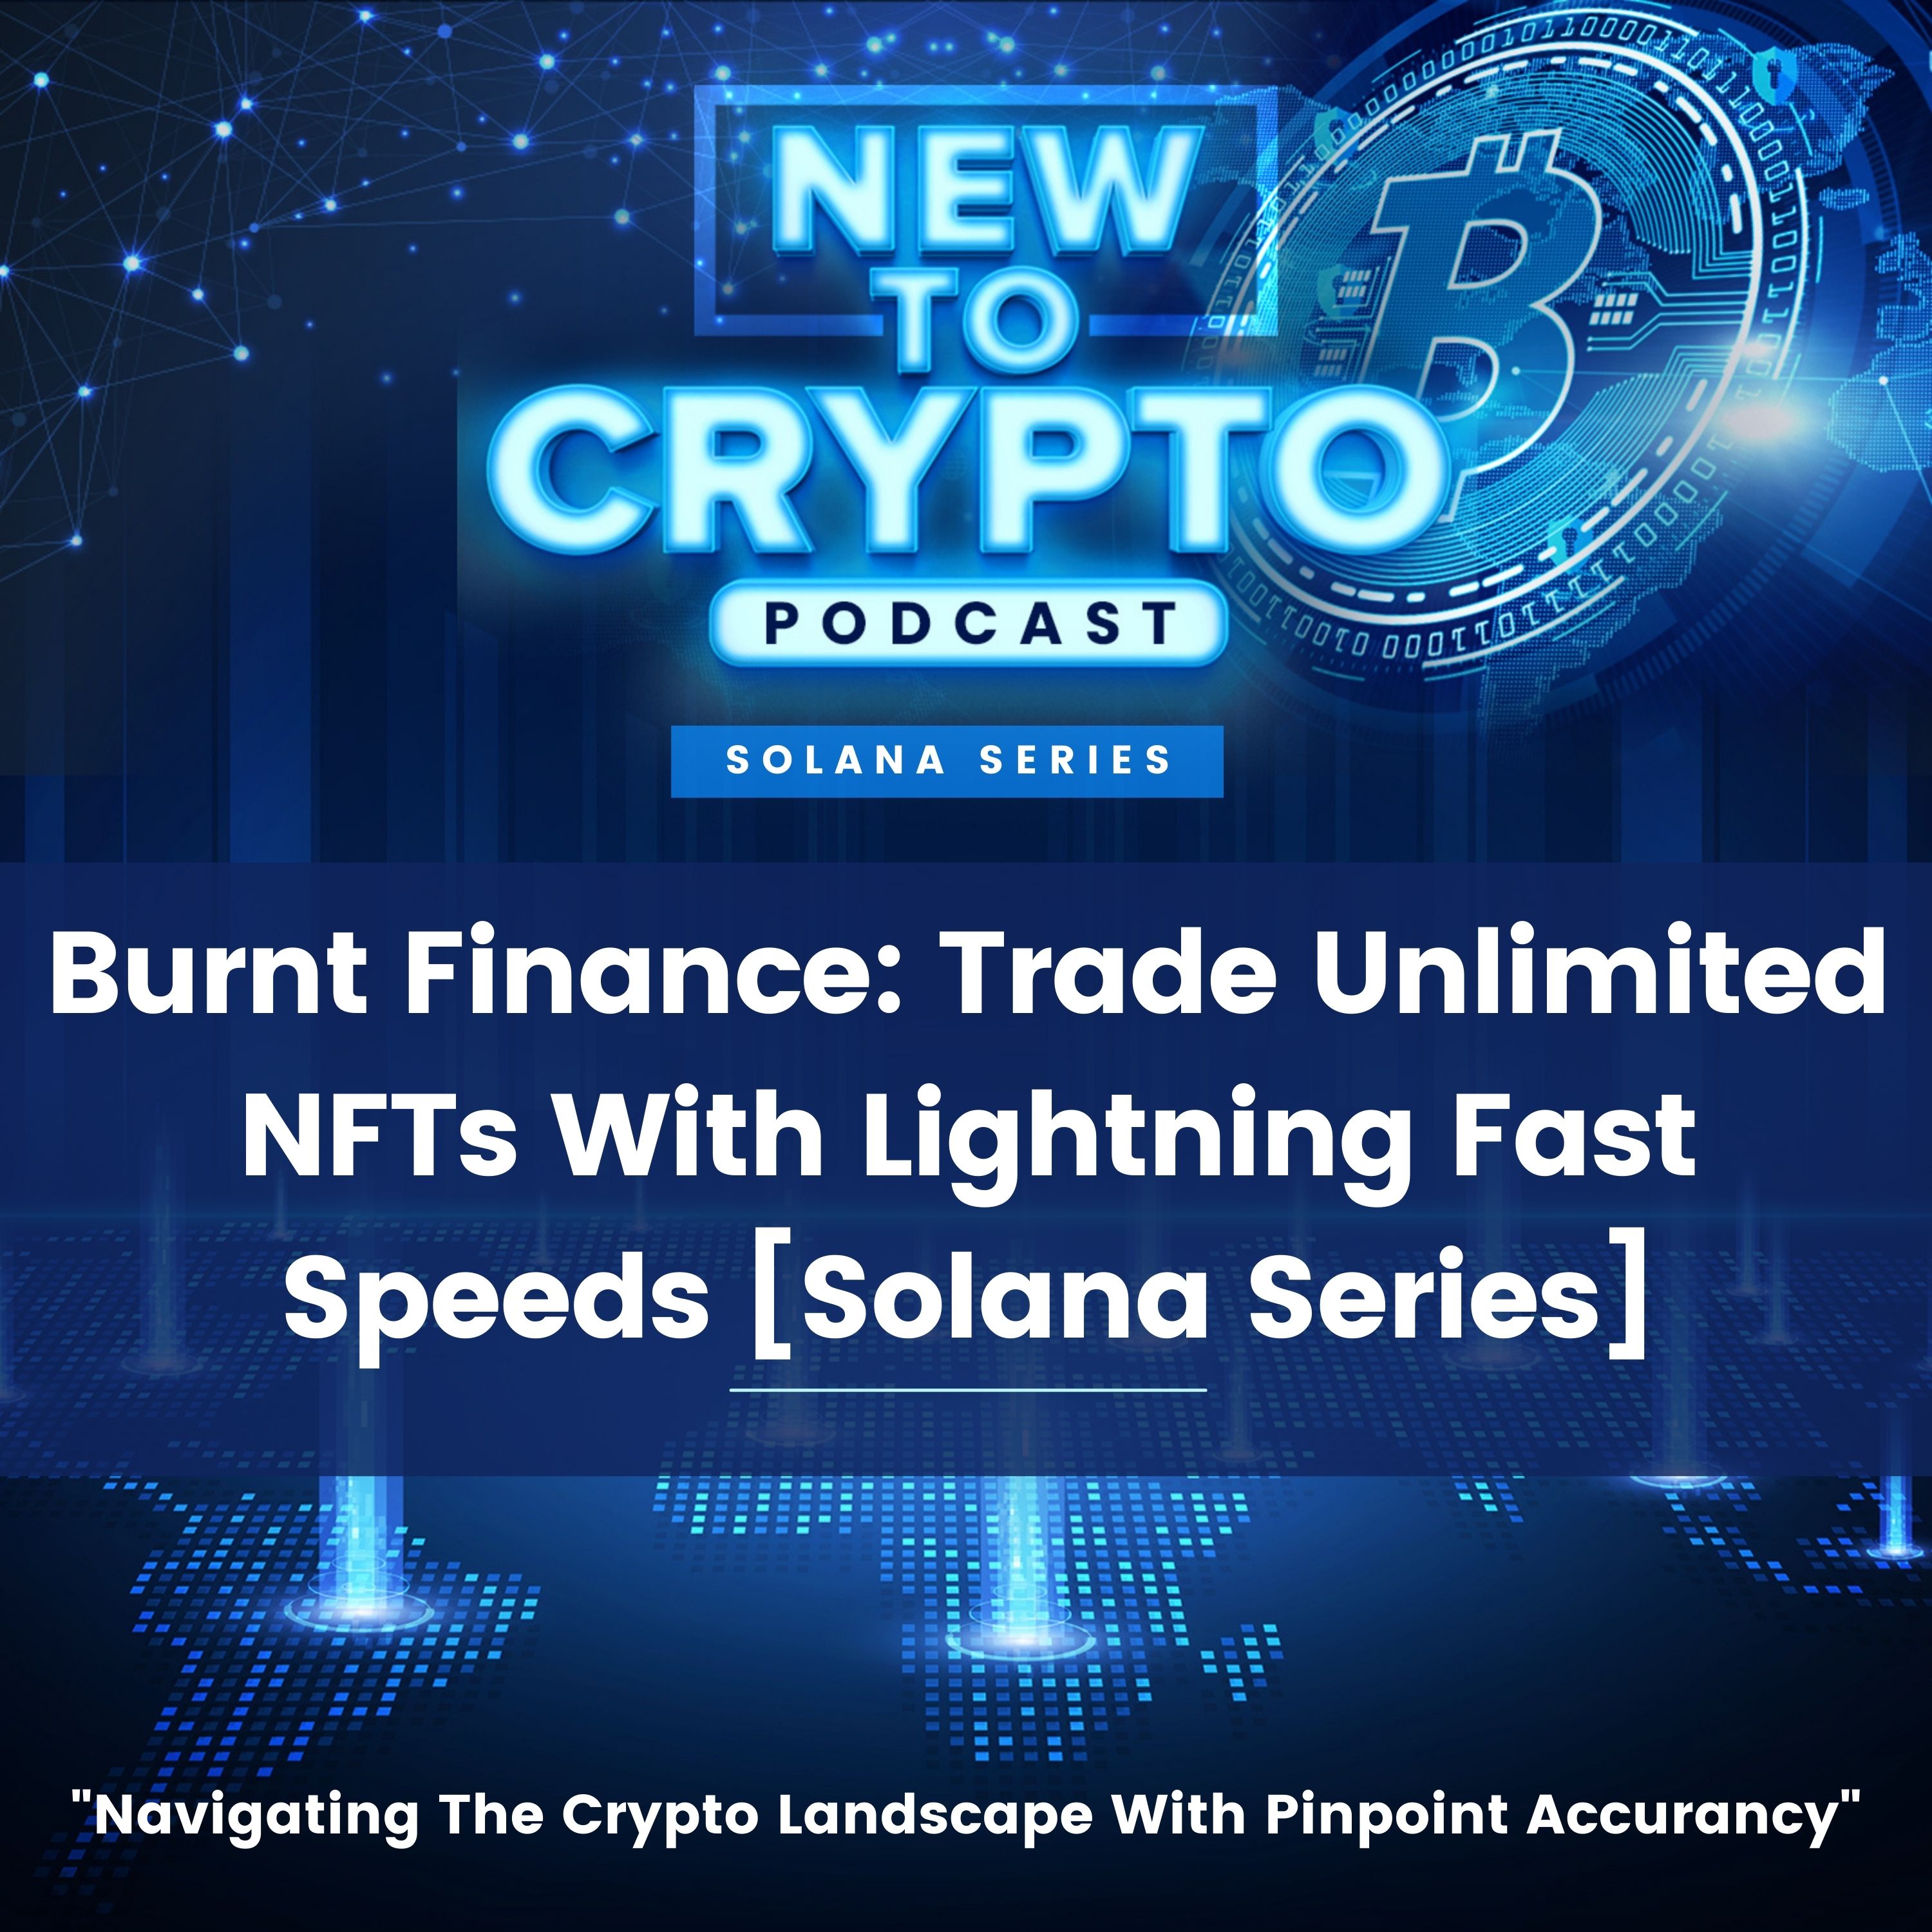 Burnt Finance: Trade Unlimited NFTs With Lightning Fast Speeds [Solana Series]